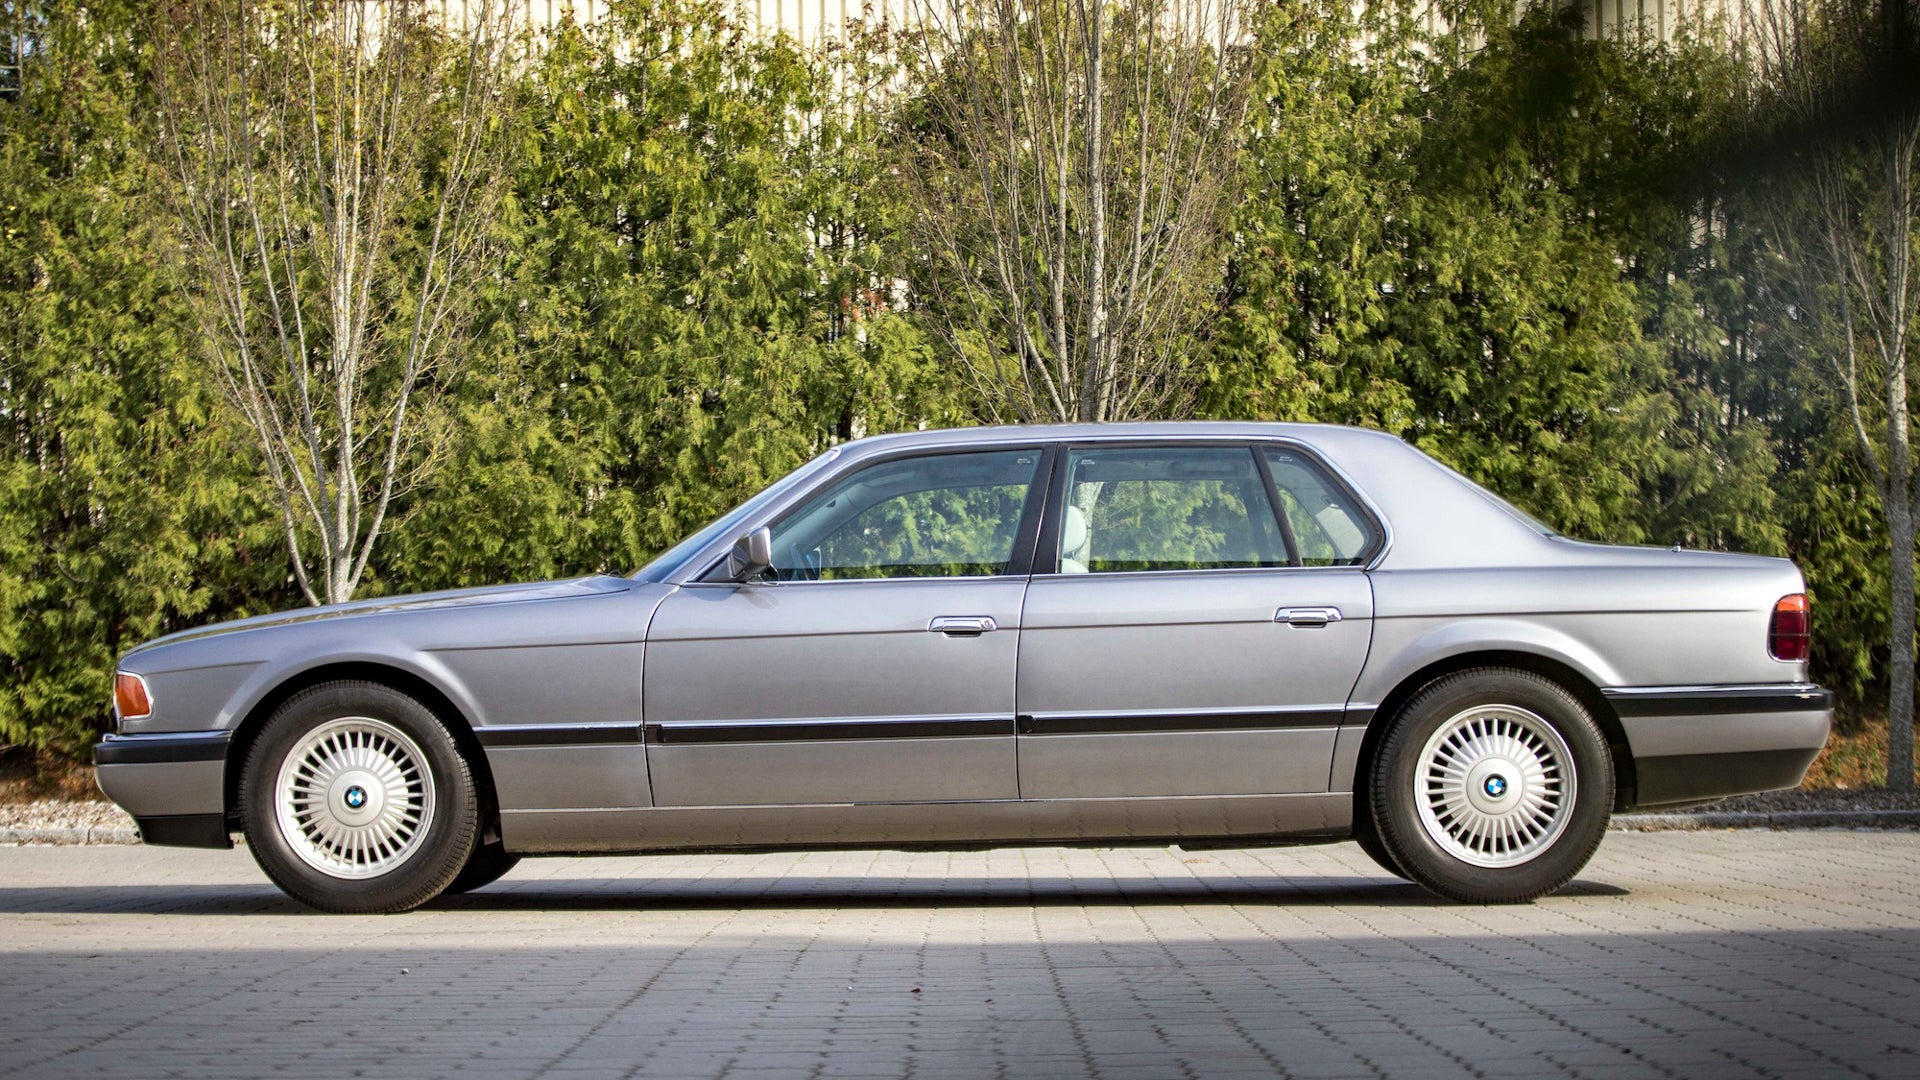 The BMW 7 Series with a top-secret V16 engine, hidden for 34 years, is finally revealed.